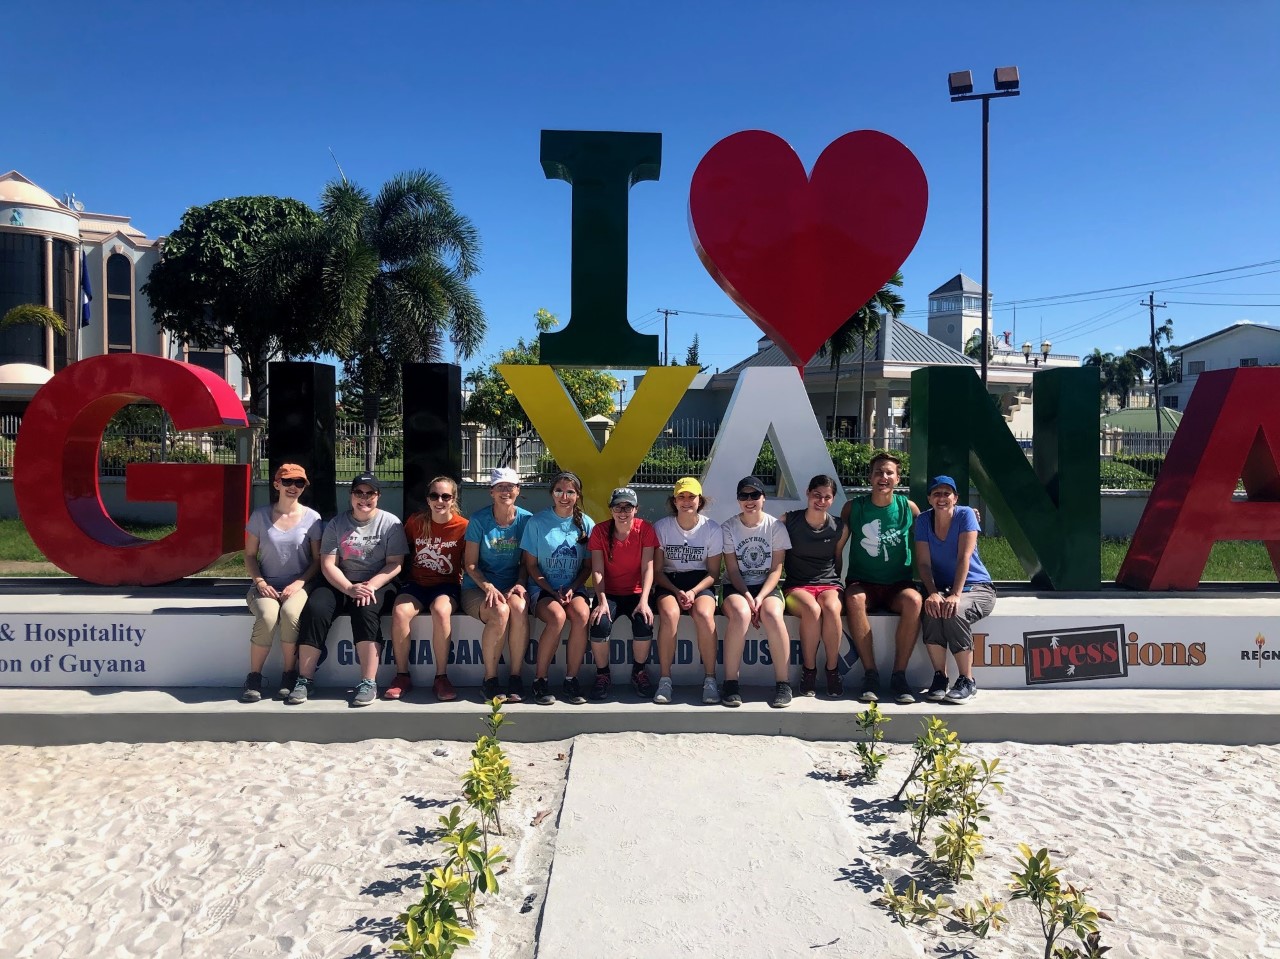 It was easy for the Mercyhurst students to fall in love with Guyana!